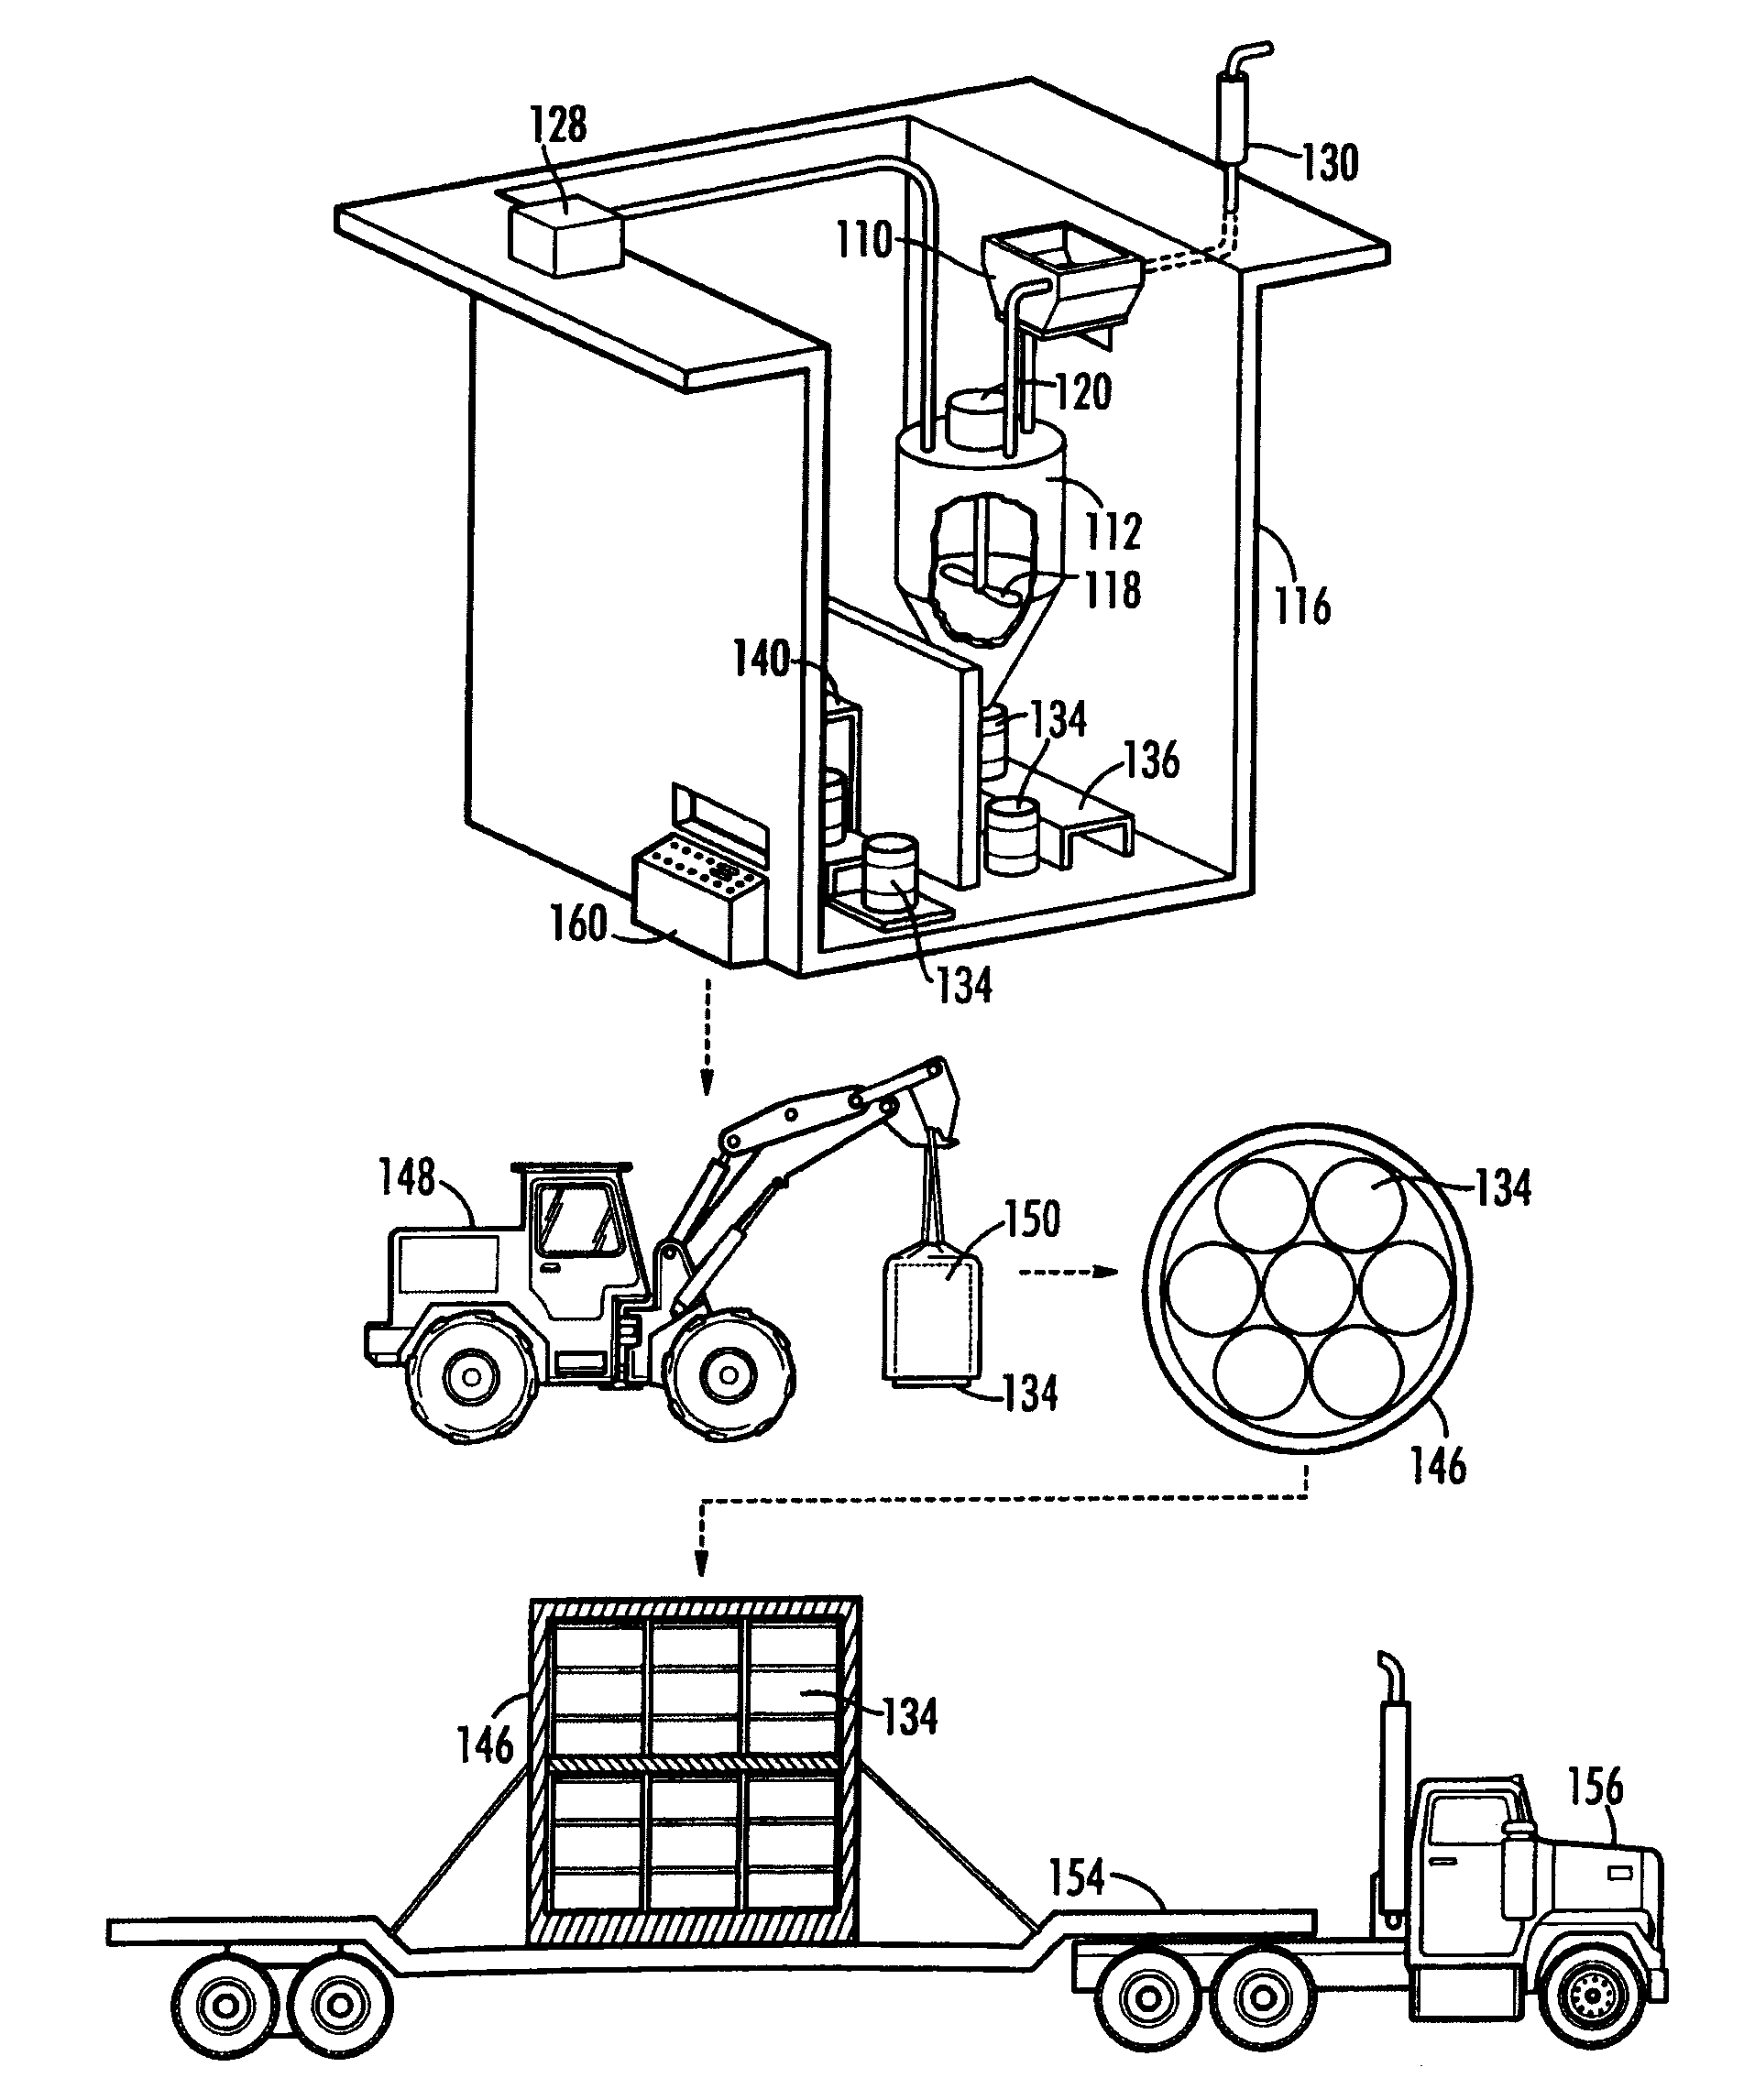 Waste Stabilization and Packaging System for Fissile Isotope-Laden Wastes